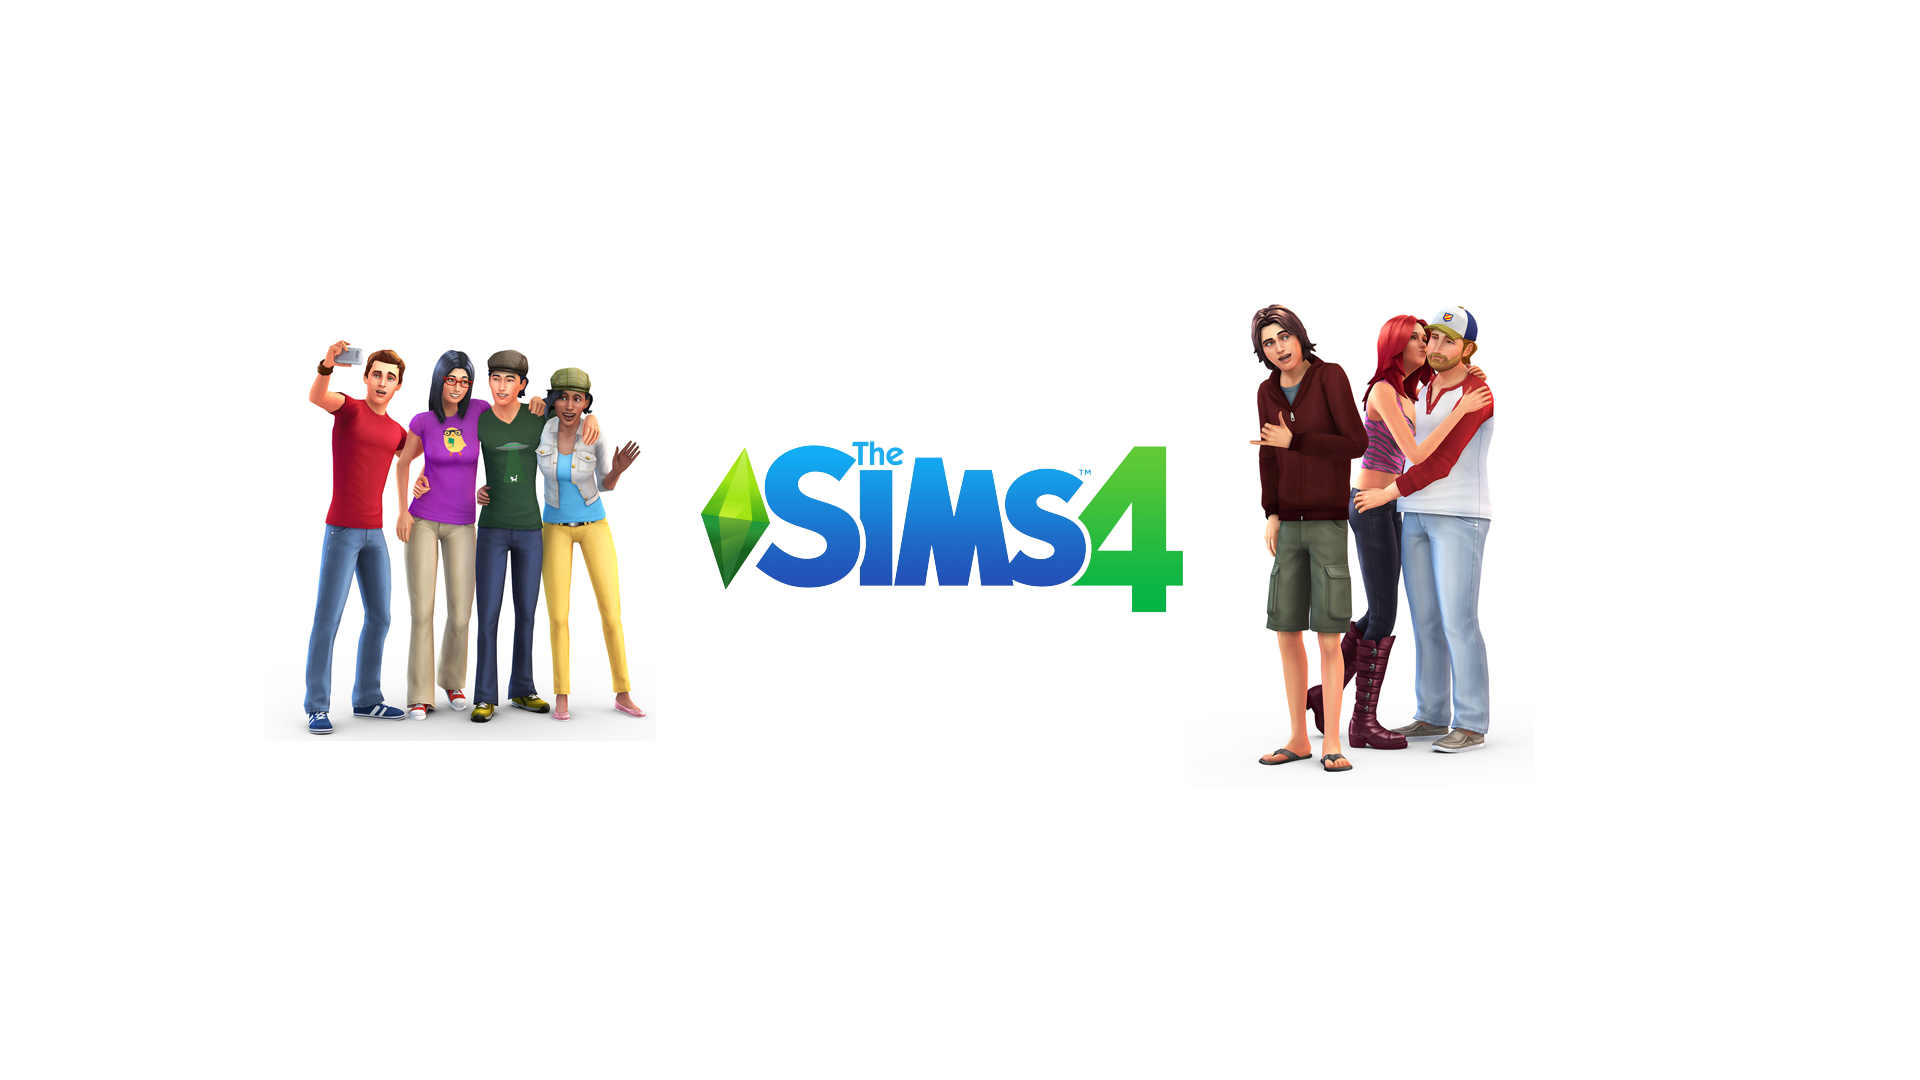 The Sims Wallpaper